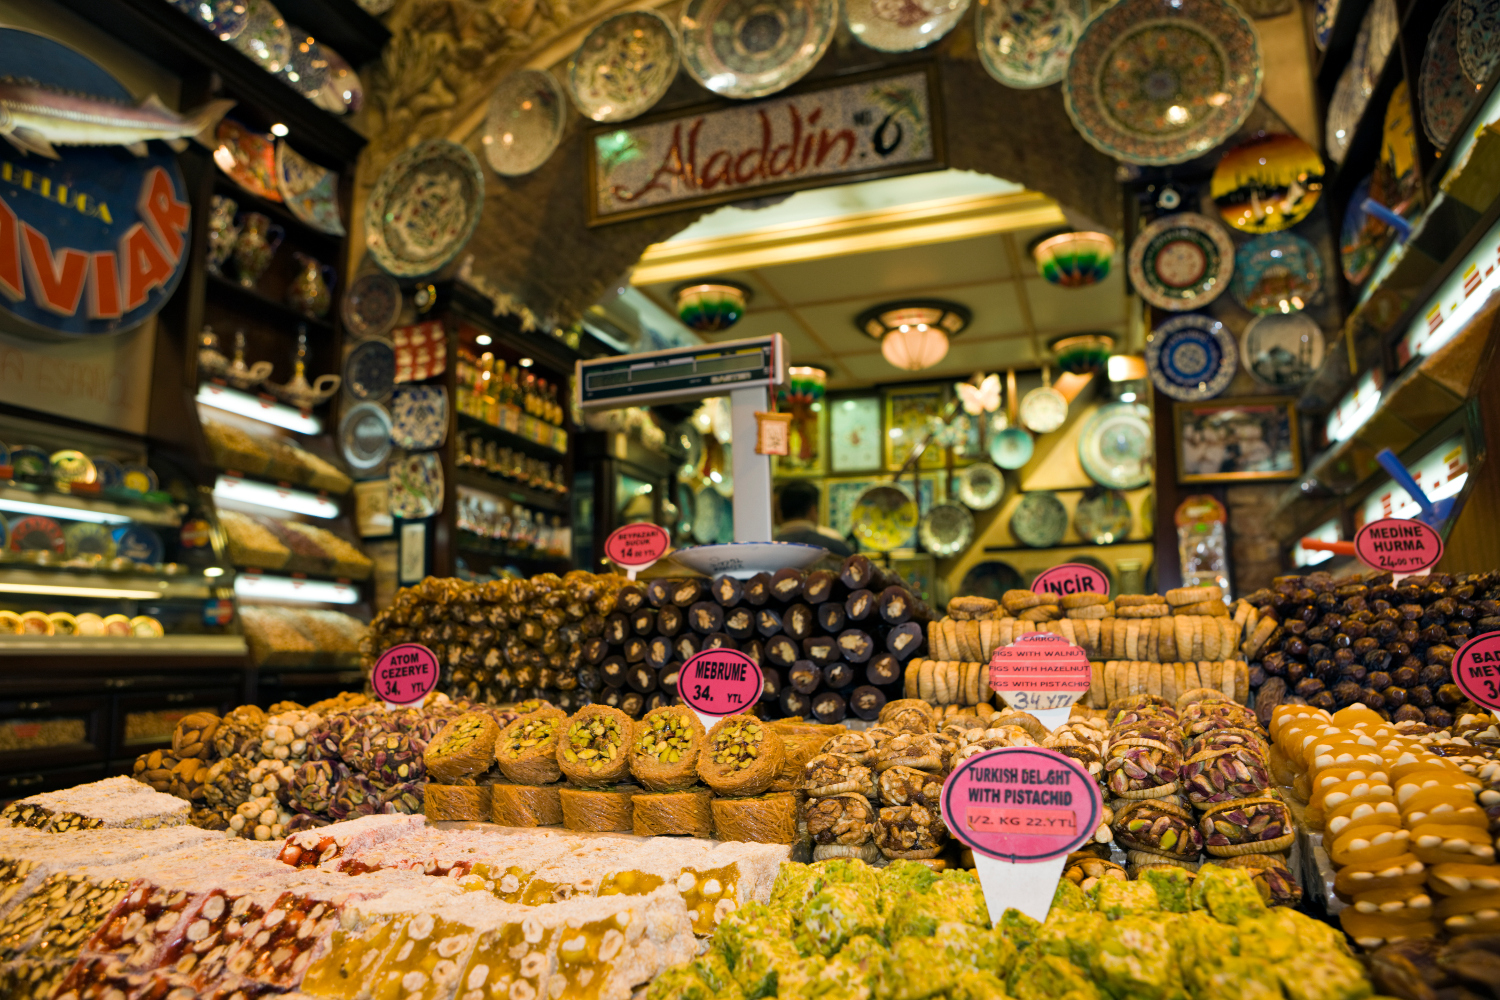 <span class="caption">Istanbul's Spice Bazaar is overflowing with local Turkish delight, but for the real deal you're better off at Küçük Pazar. Image by Reinhard Dirscherl / WaterFrame / Getty</span>